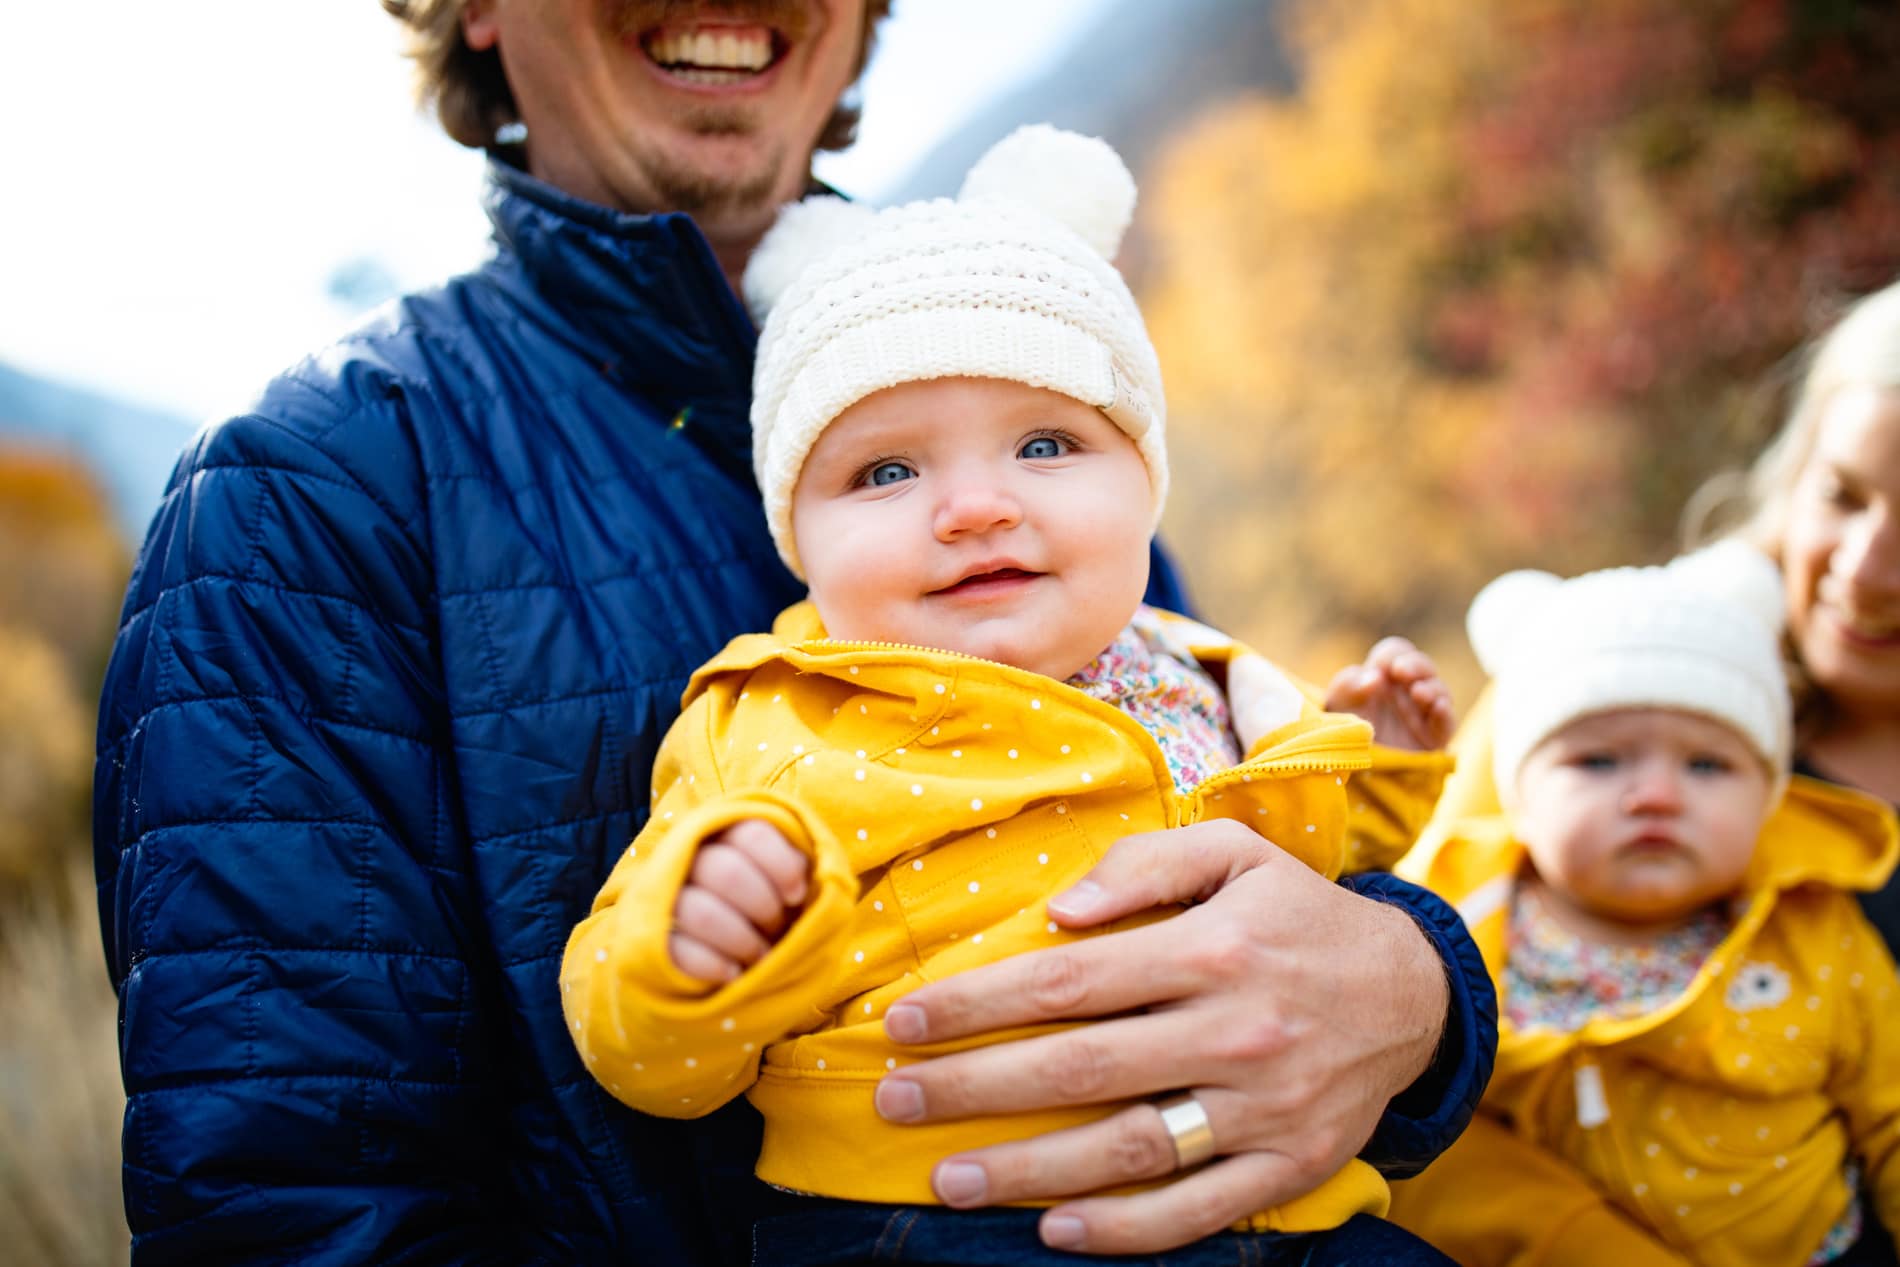 Family photographer, a father holds his smiling baby. Baby wears a yellow coat and knit beanie.